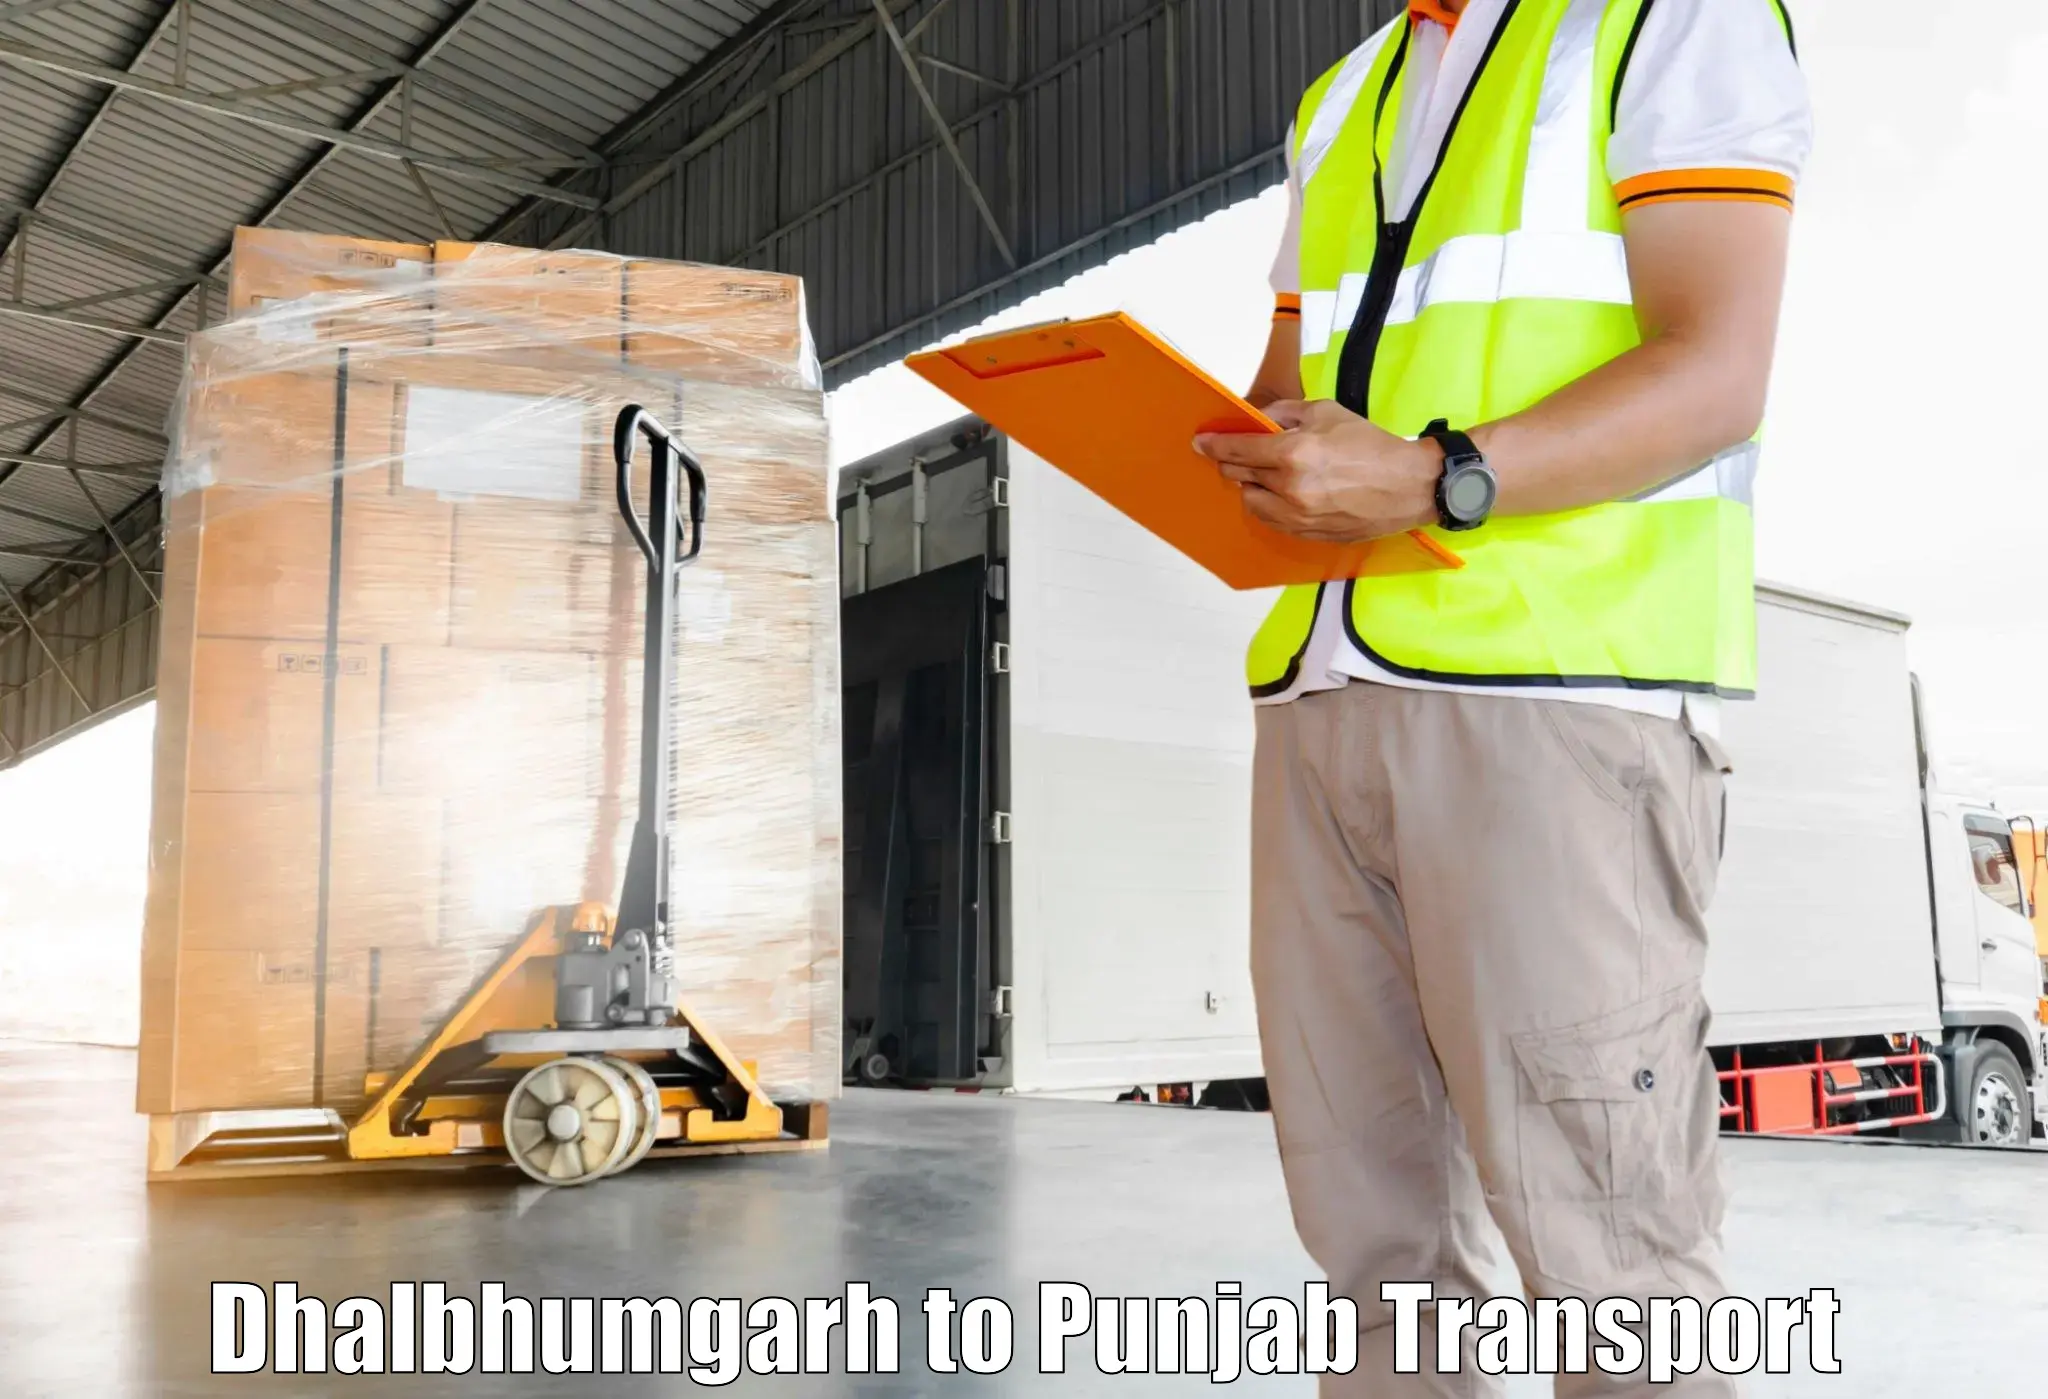 Air cargo transport services Dhalbhumgarh to Sultanpur Lodhi